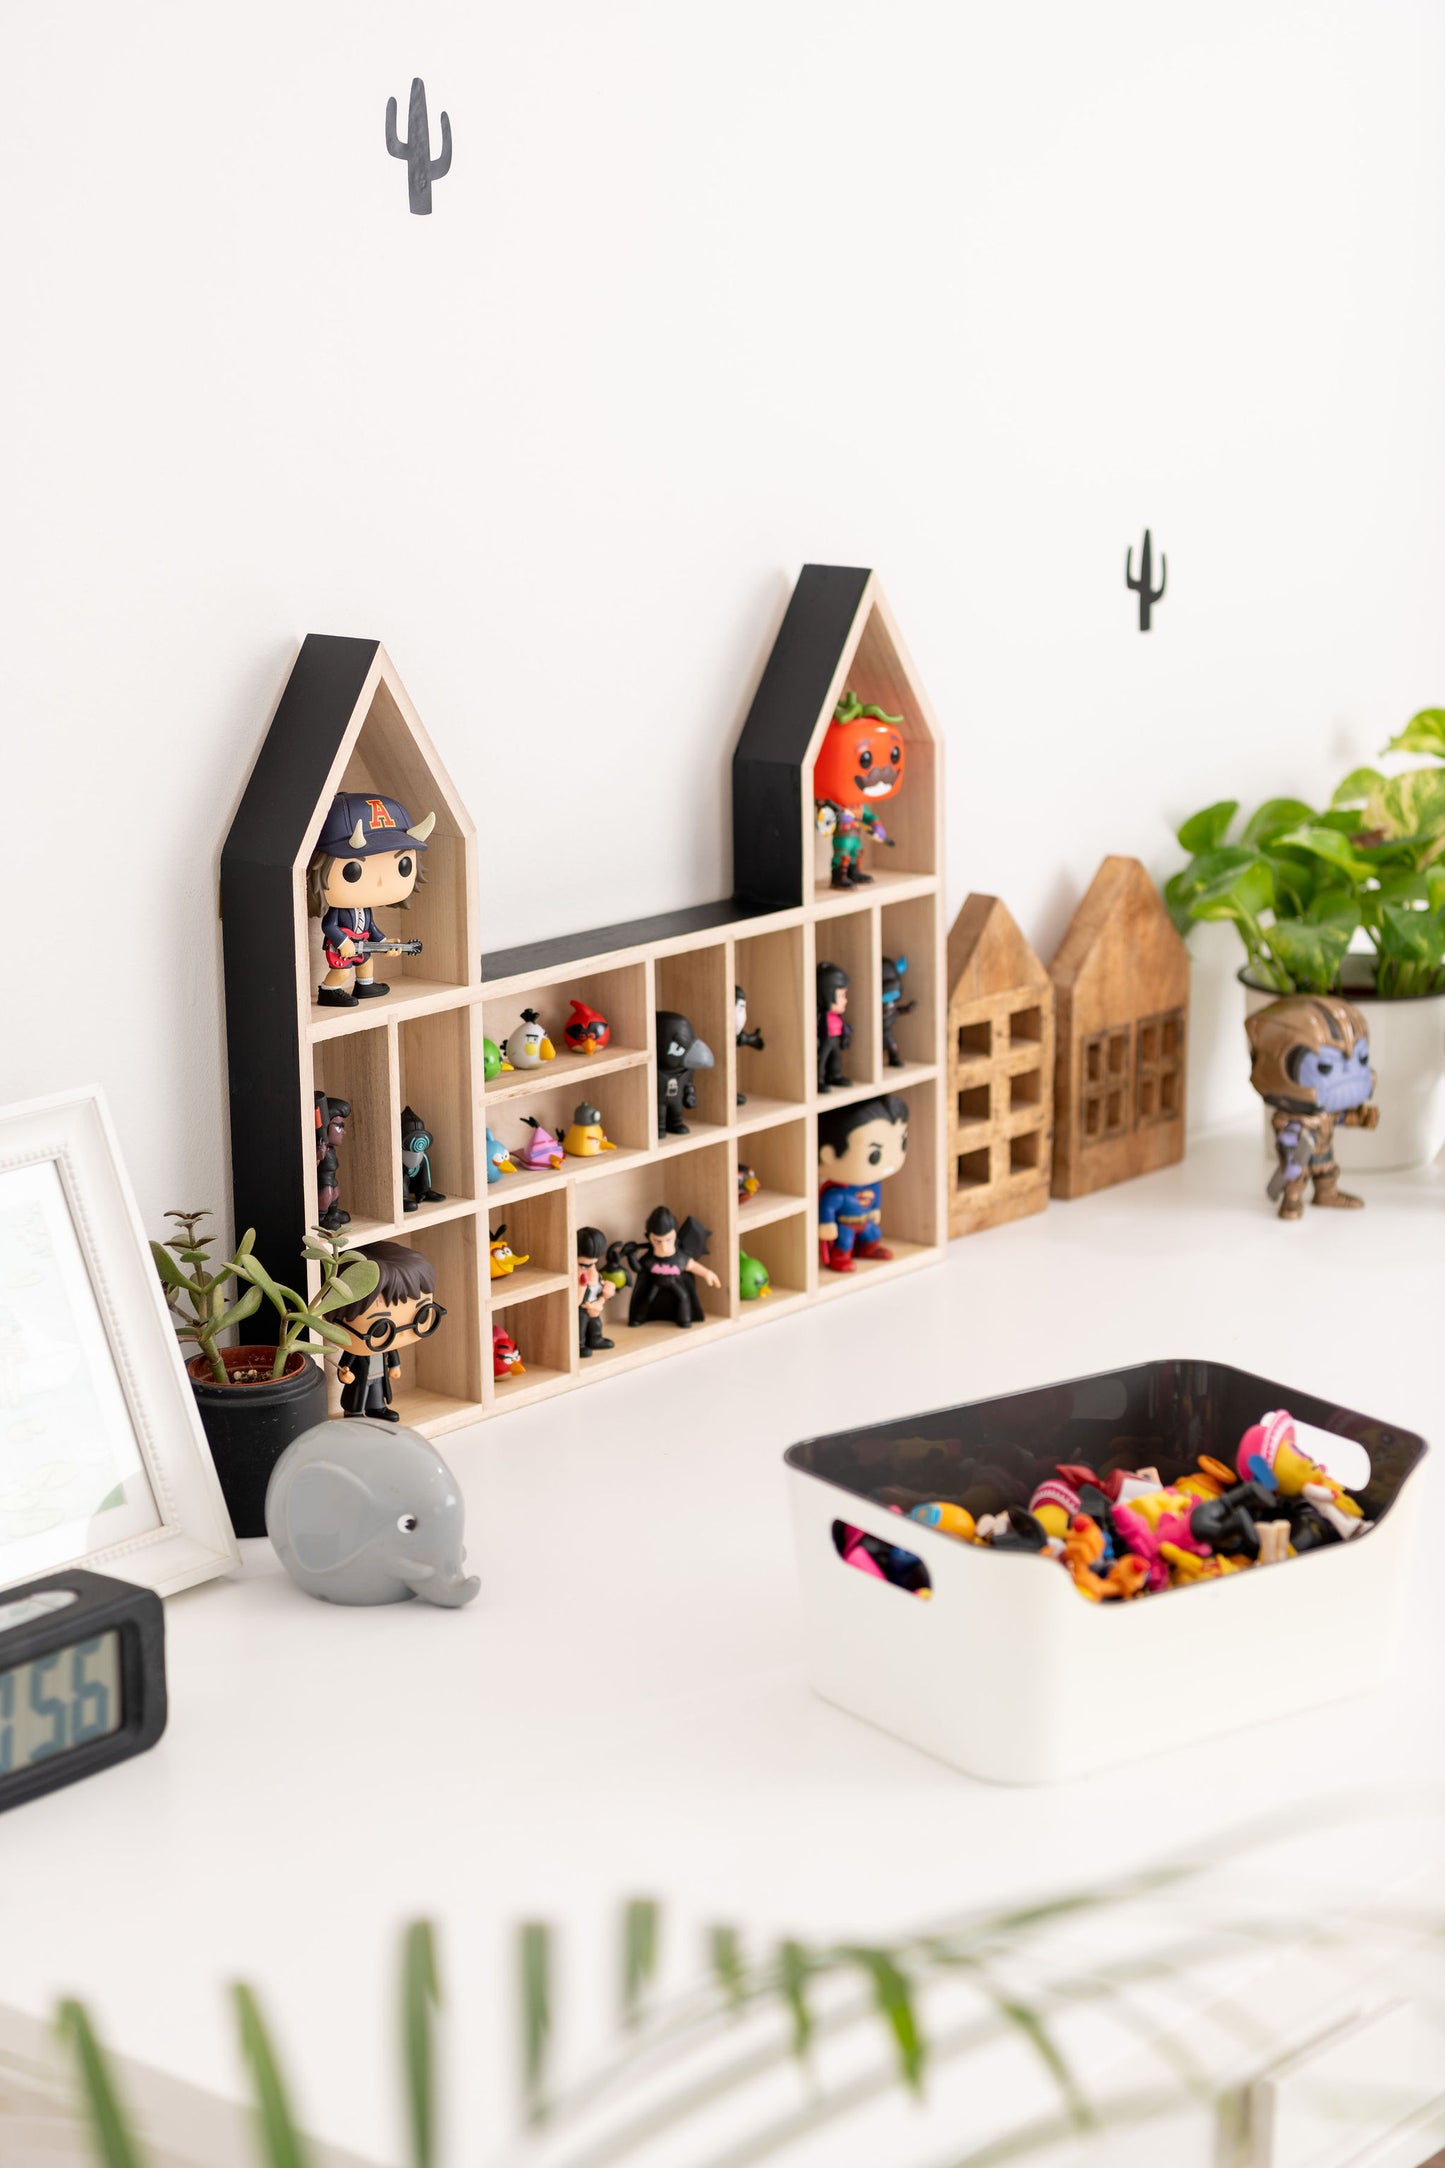 POP figures and angry birds are displayed on a castle shelf with black painted outer walls standing on a table